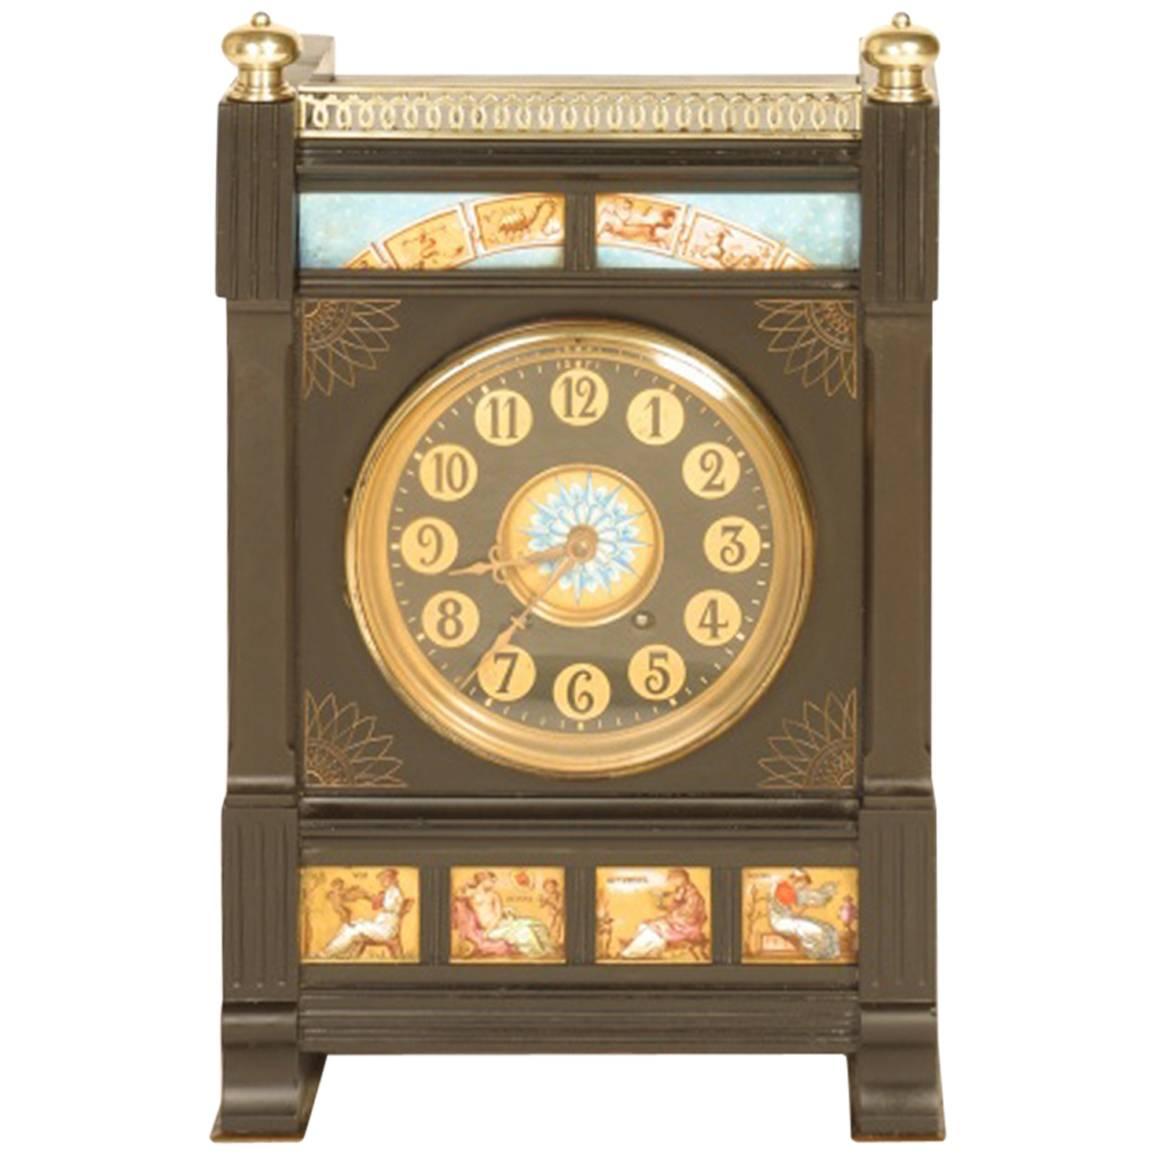 Aesthetic Movement Zodiac Black Marble Mantle Clock with Gong-Striking Movement